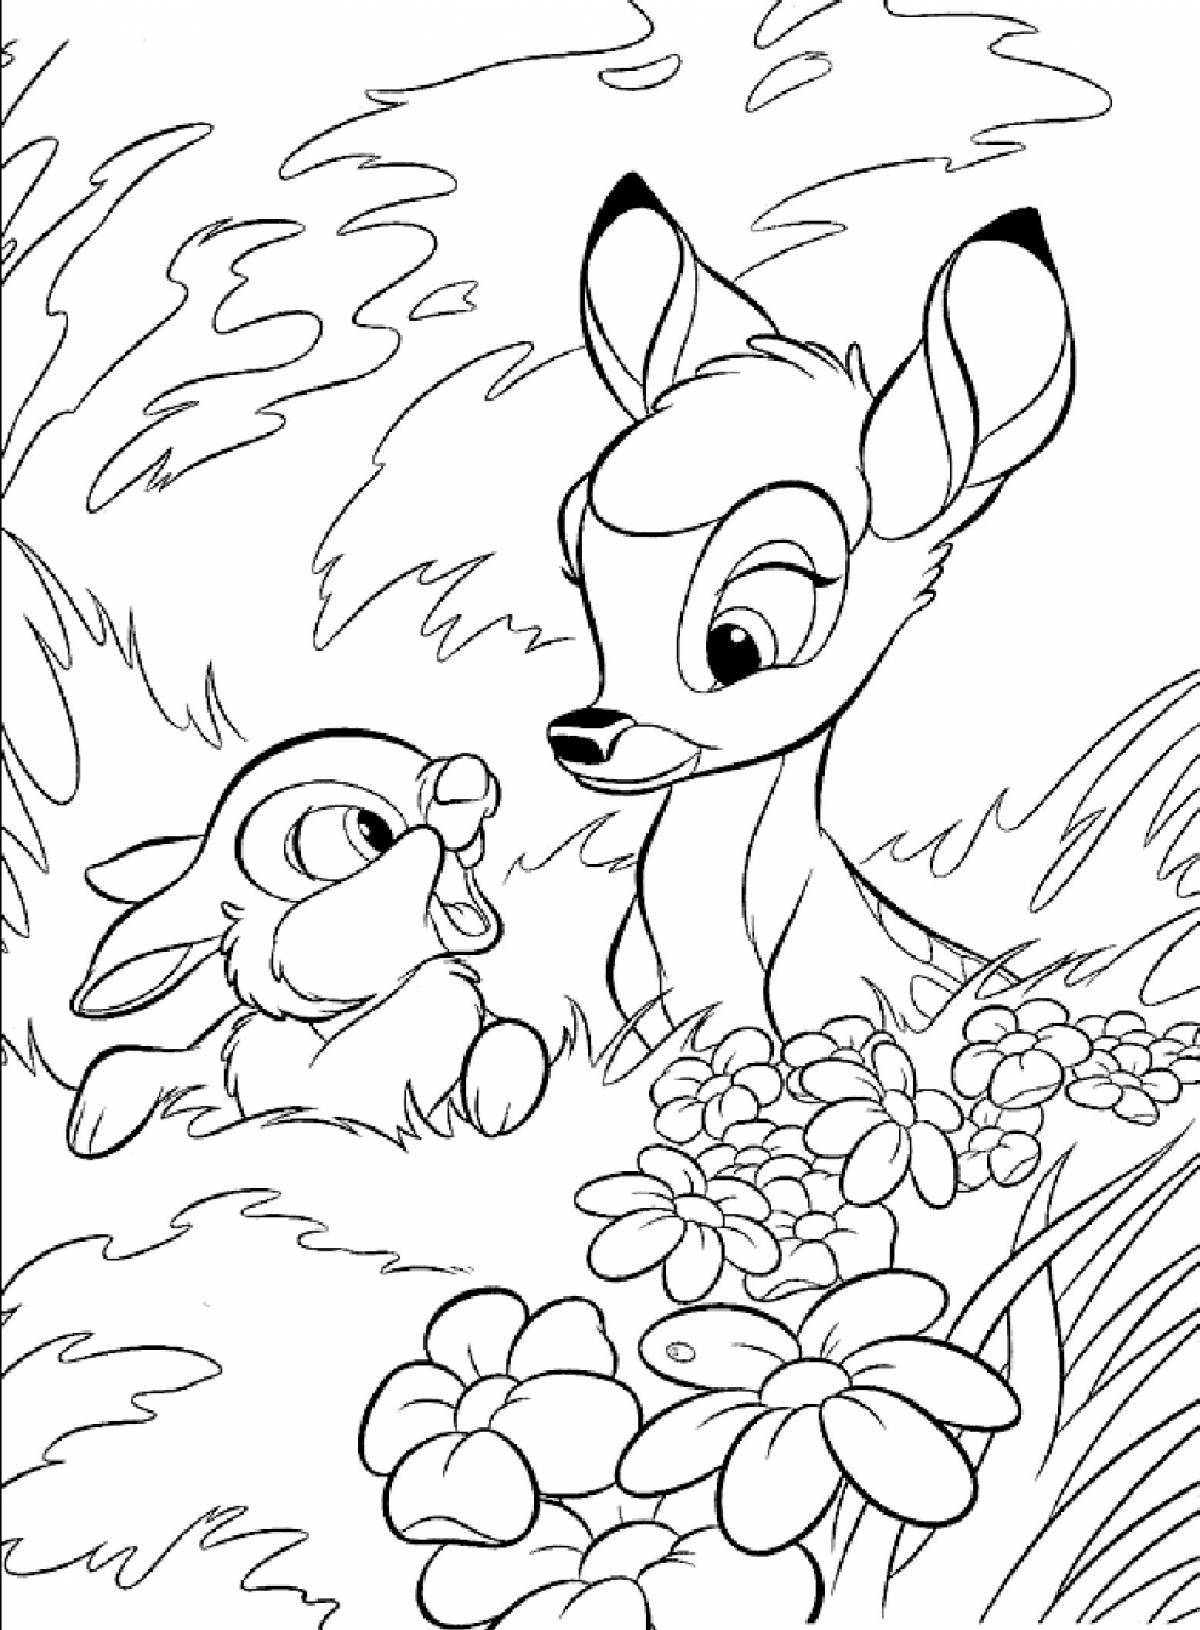 Explosive coloring book for 6-7 year old cartoon kids